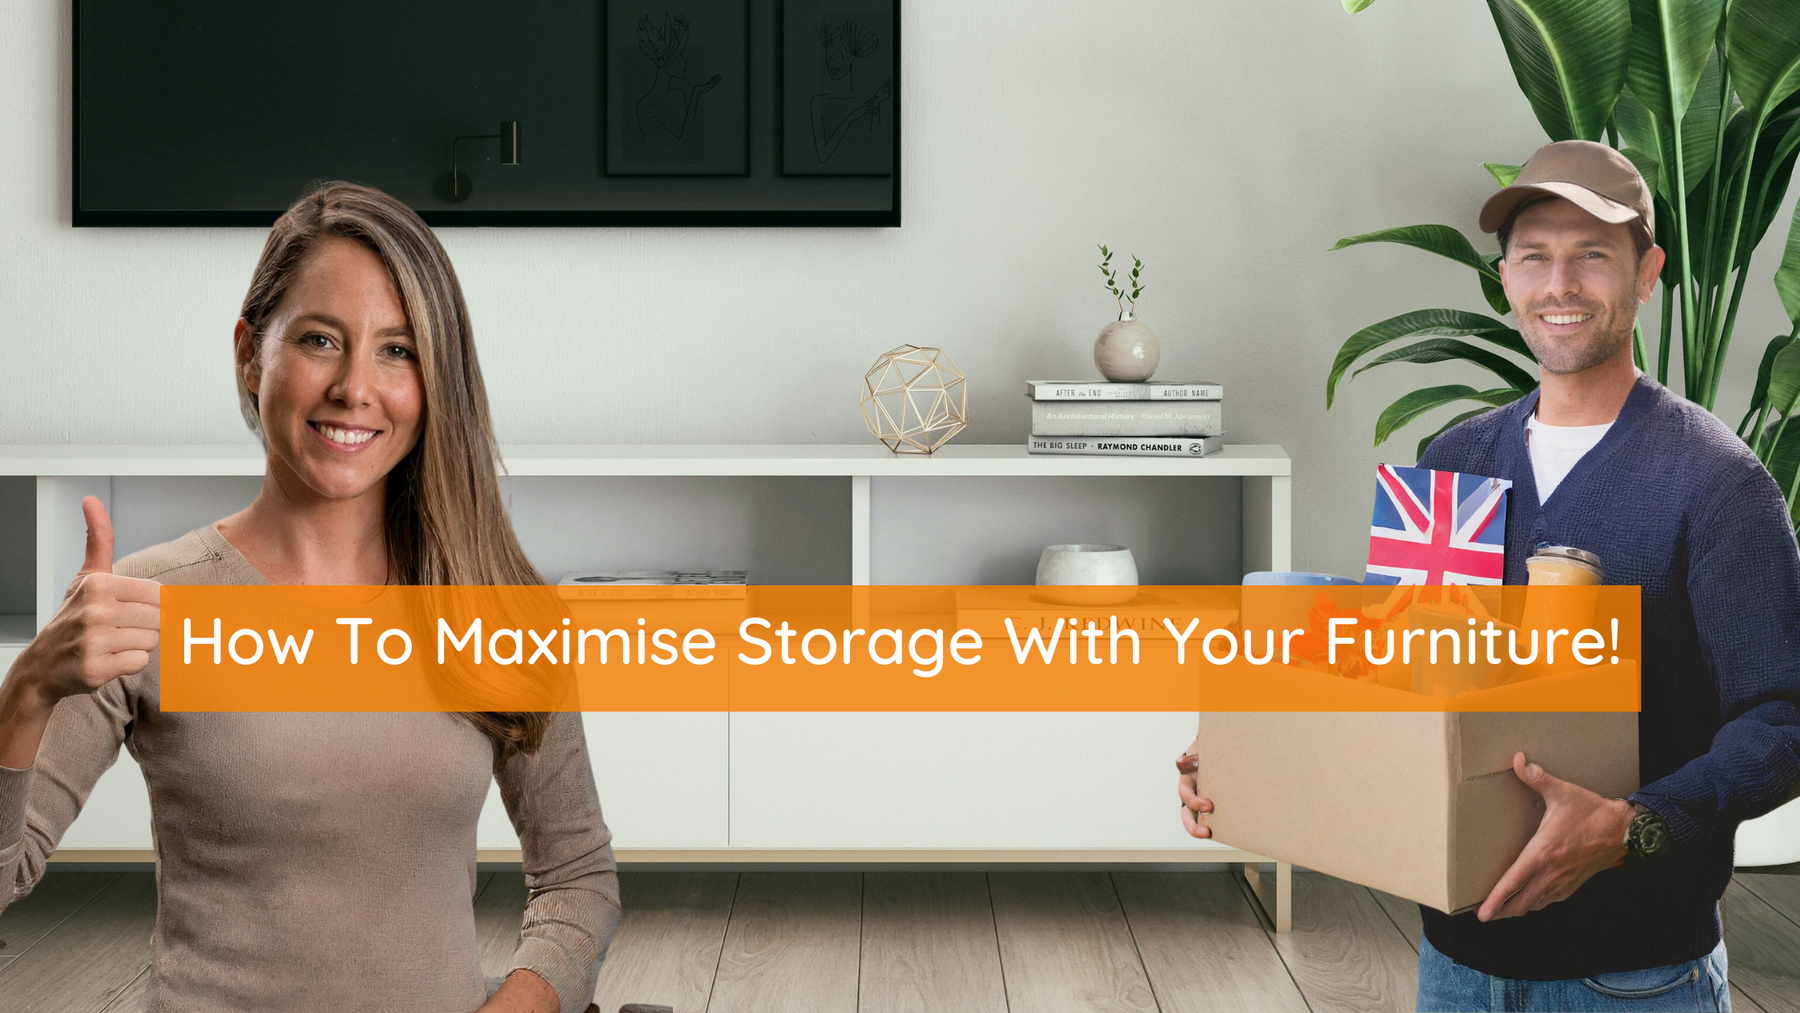 How To Maximise Storage With Your Furniture!